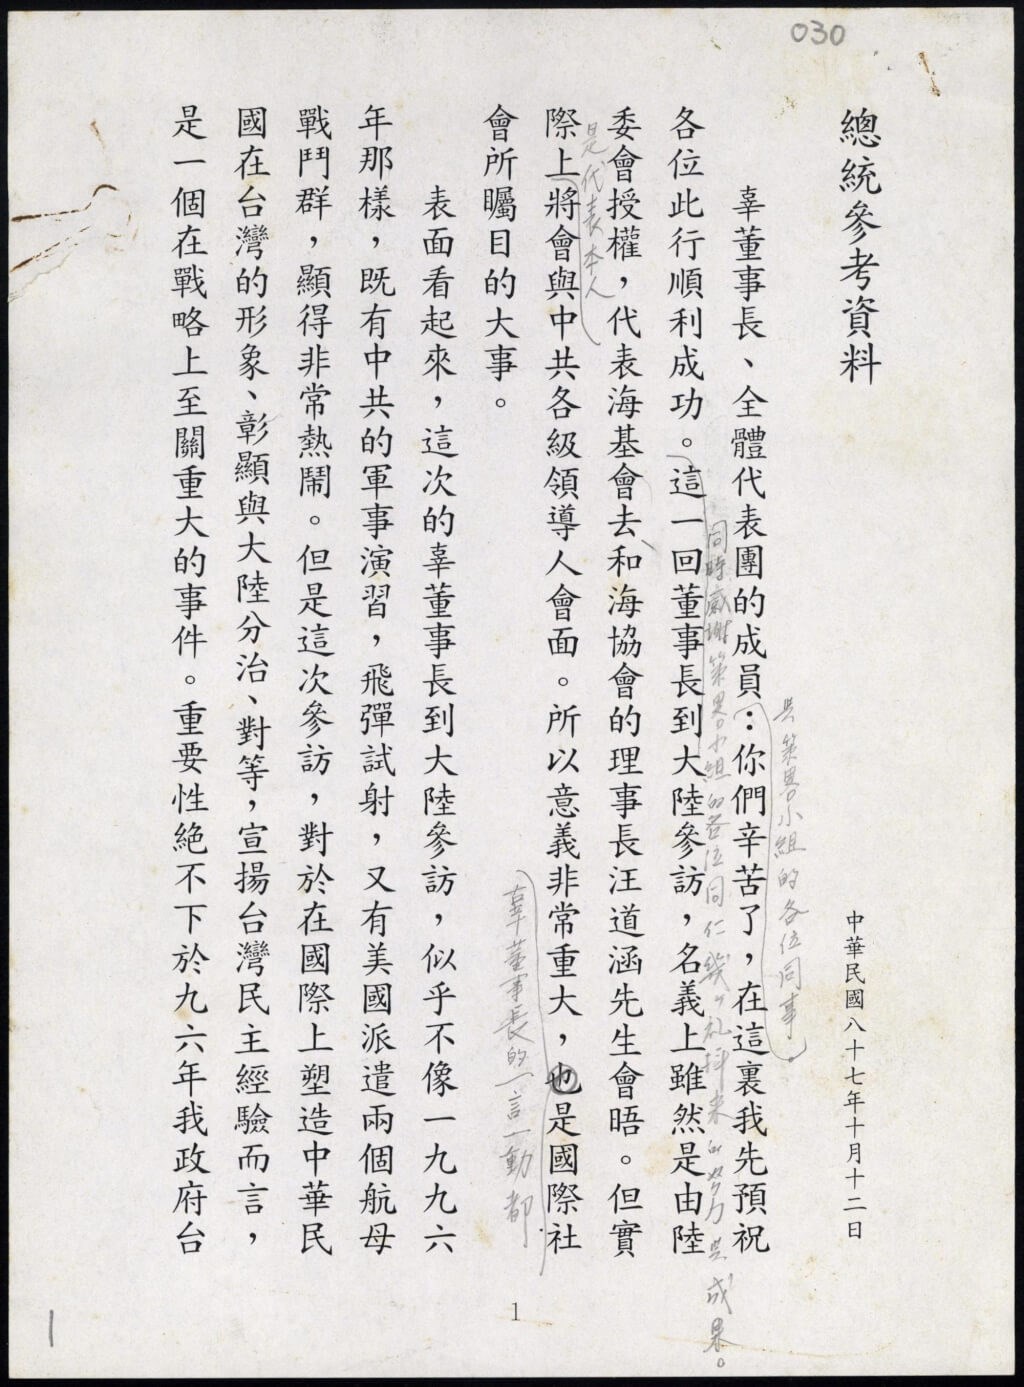 A hand-annotated copy of a send-off speech given by Lee to a delegation led by Straits Exchange Foundation Chairman Koo Chen-fu that went to Shanghai to meet with Association for Relations Across the Taiwan Straits Chairman Wang Daohan in 1998 (Photo courtesy of Academia Historica)